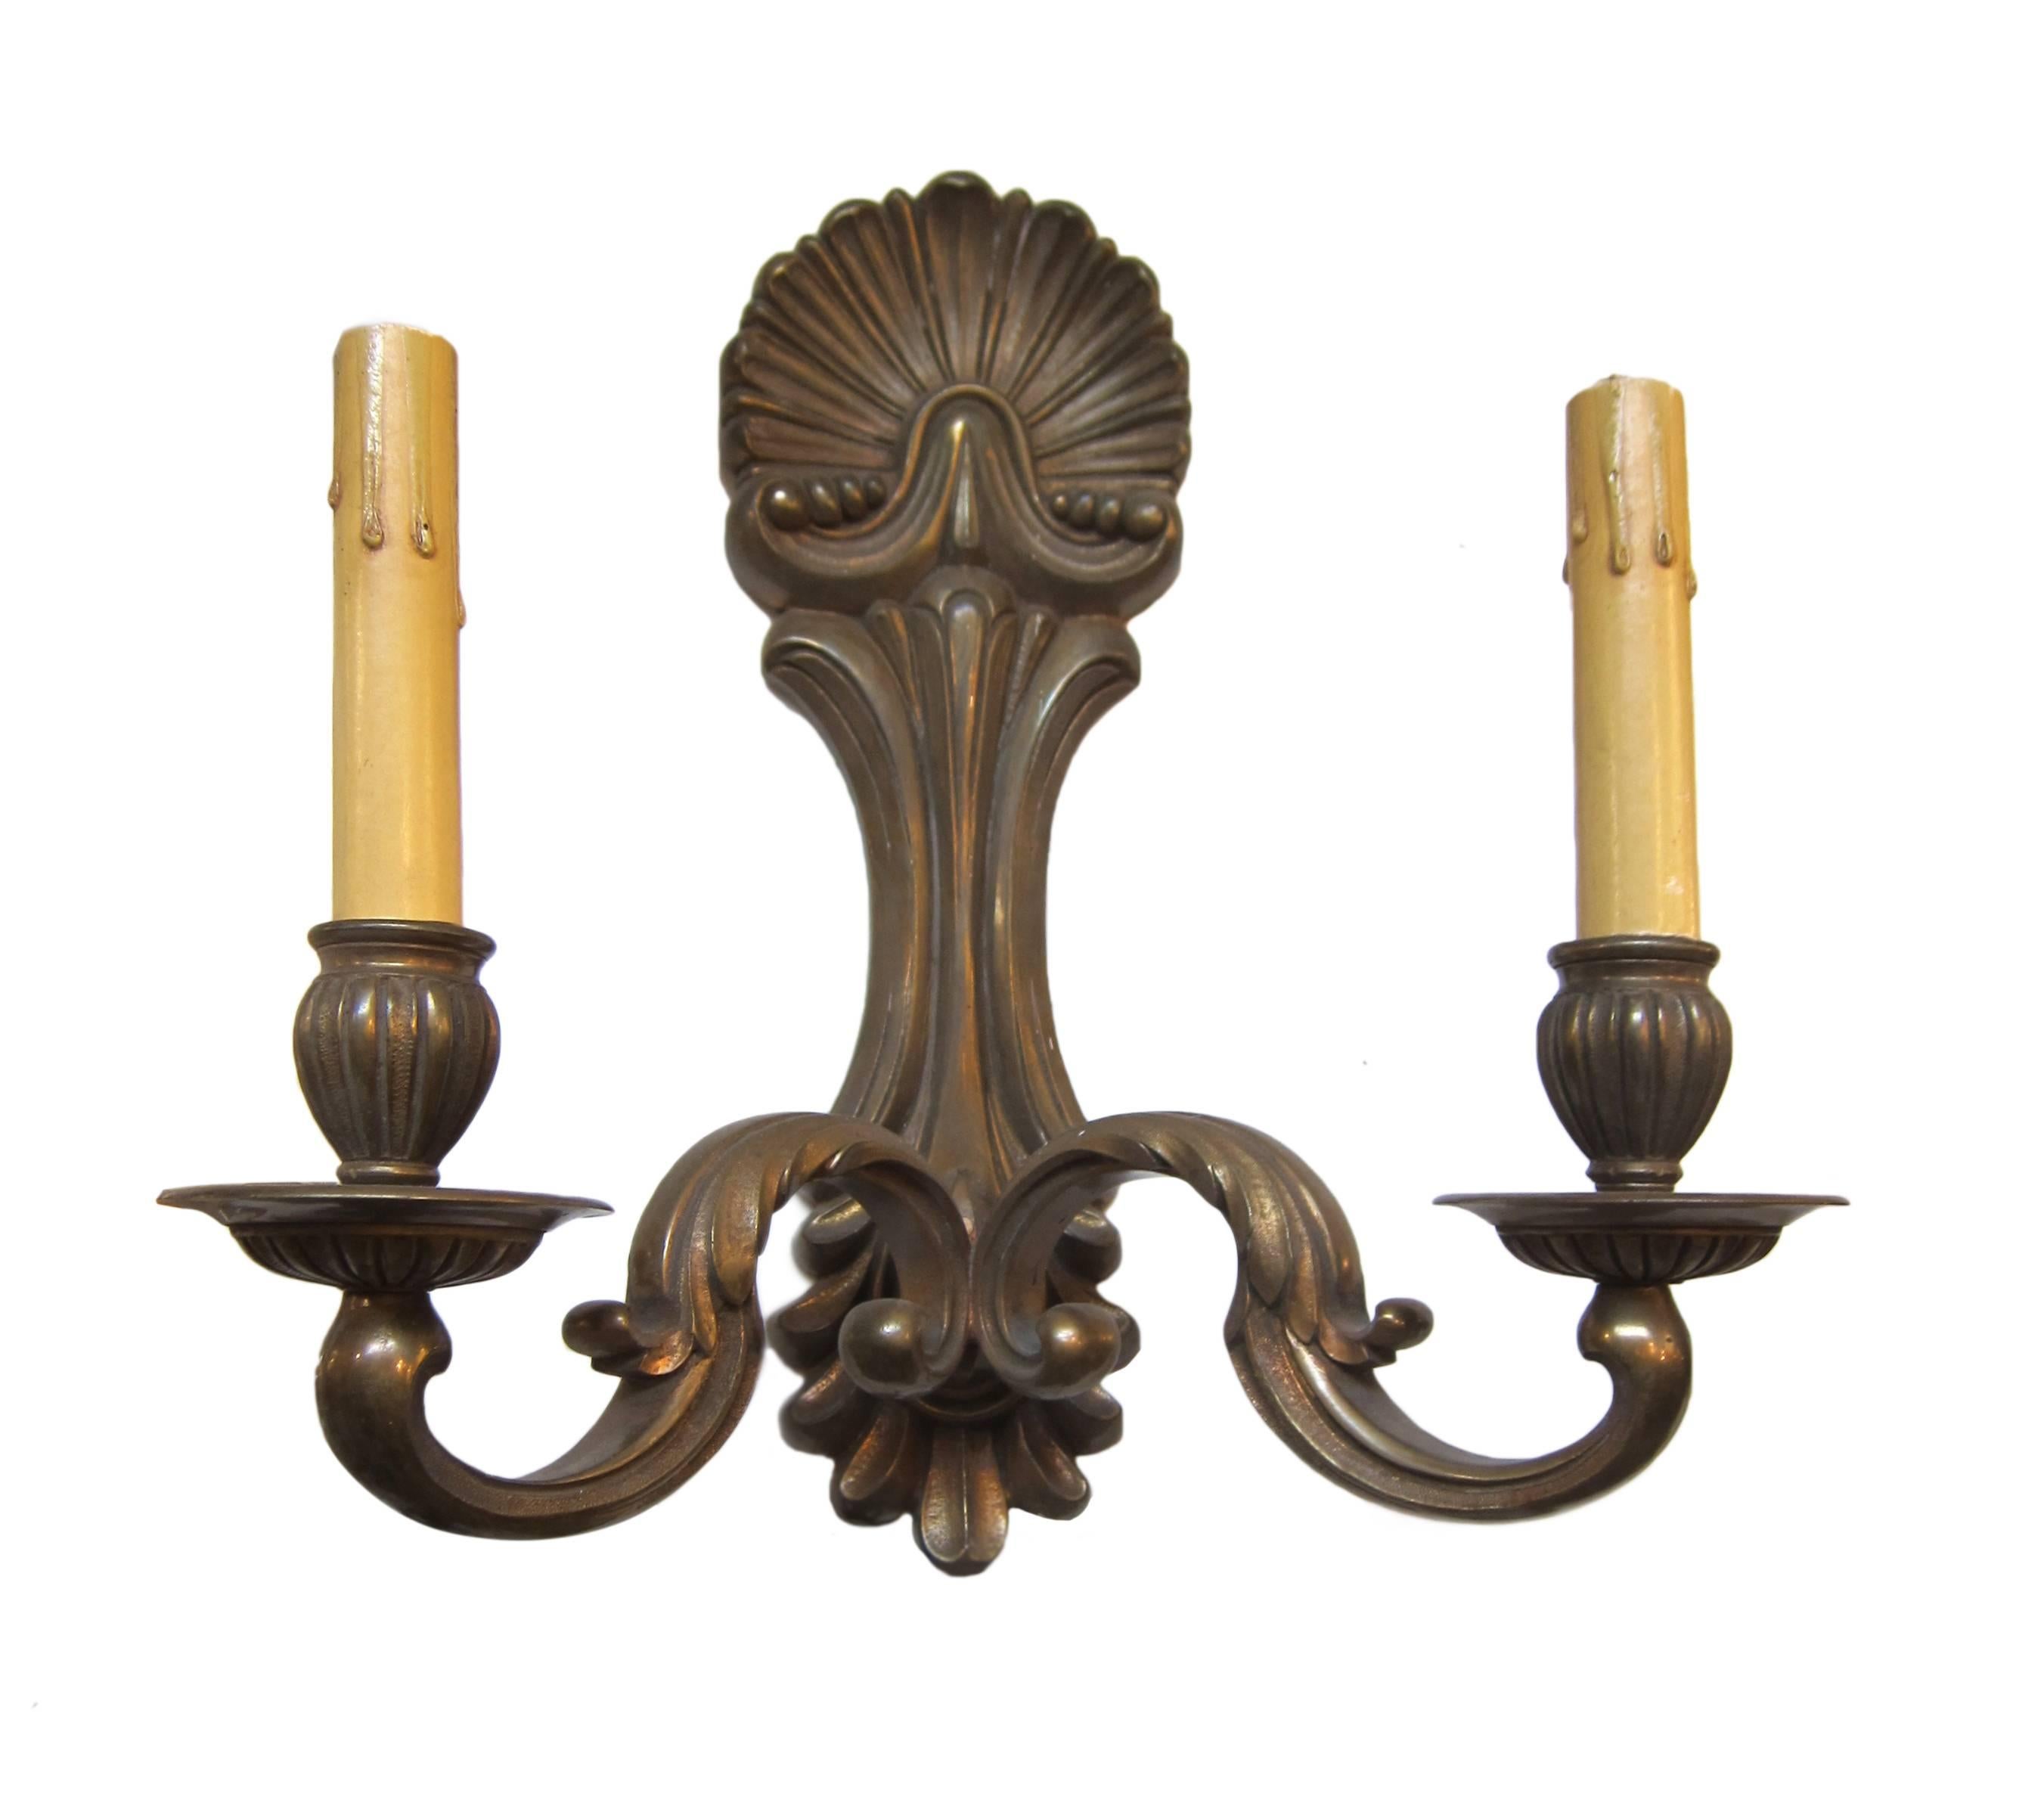 1920s pair of bronze two-arm sconces. Priced as a pair. This can be seen at our 400 Gilligan St location in Scranton, PA.